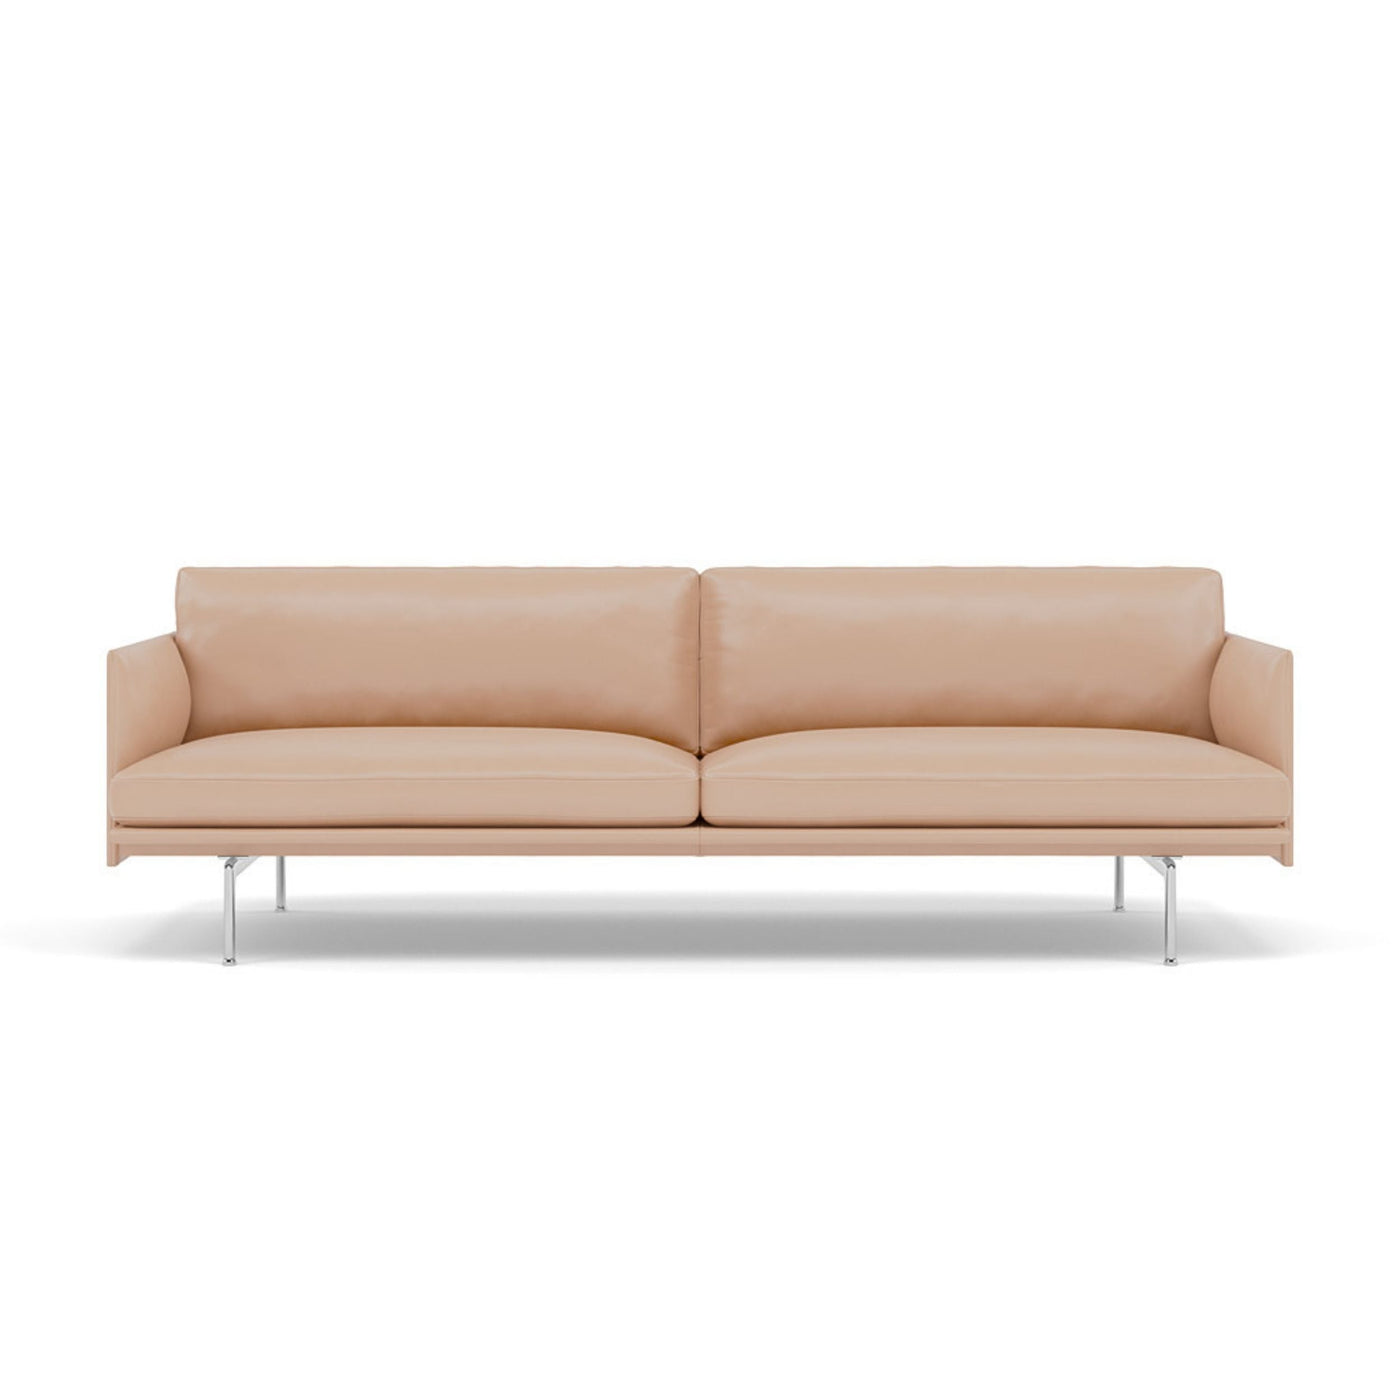 Beige Refine Leather by Camo. Upholstery leather made to order for Muuto Outline sofas. Order free fabric swatches at someday designs. 